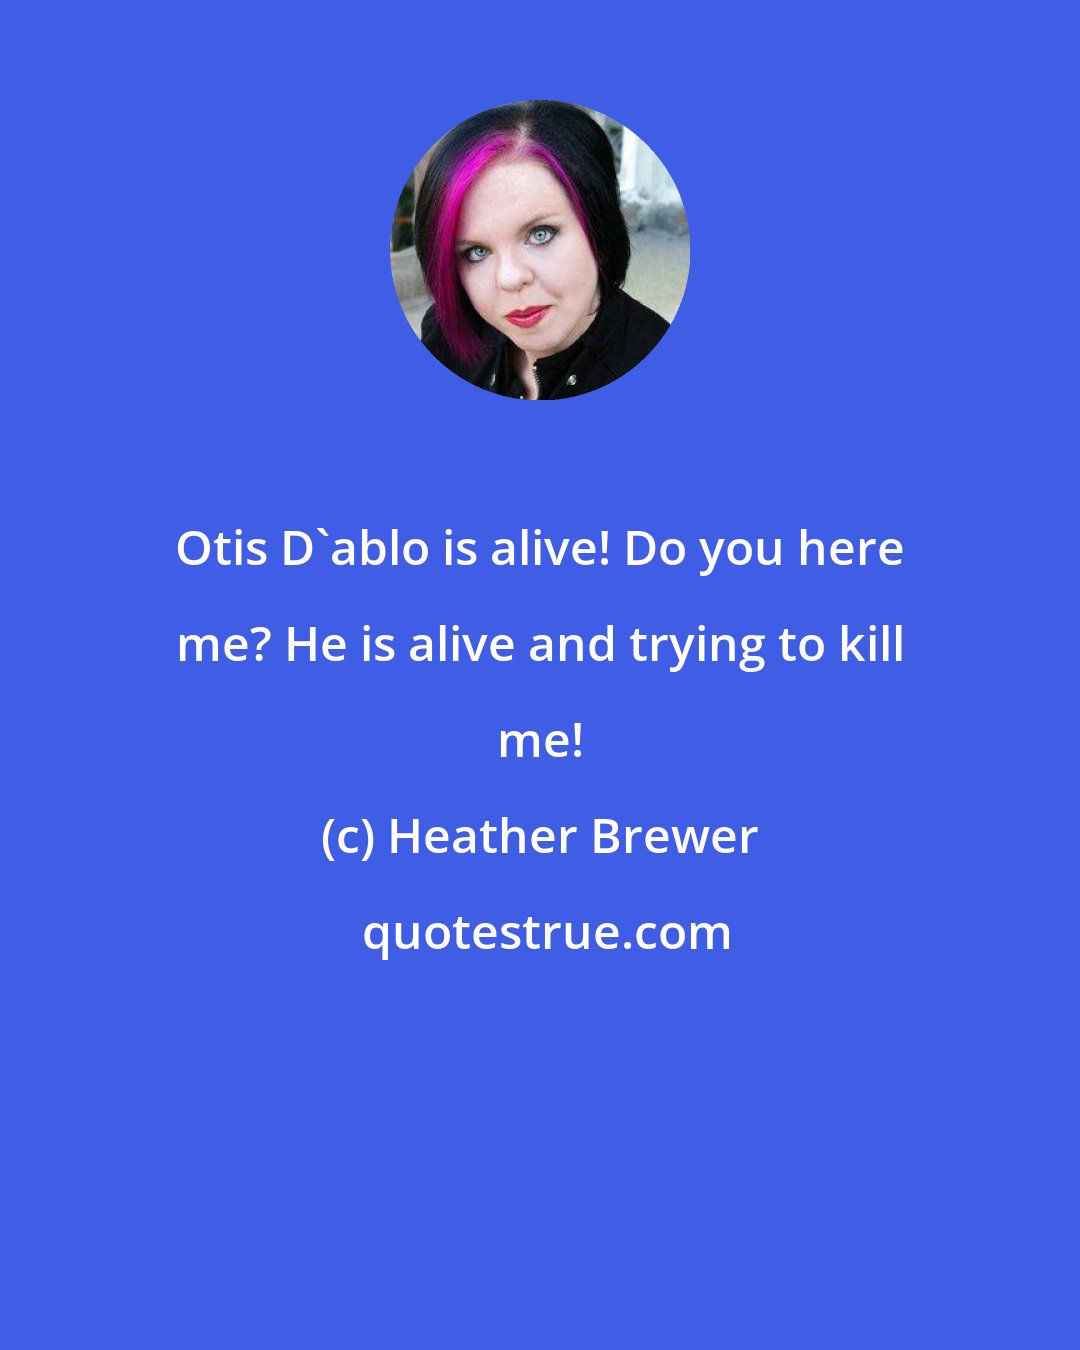 Heather Brewer: Otis D'ablo is alive! Do you here me? He is alive and trying to kill me!